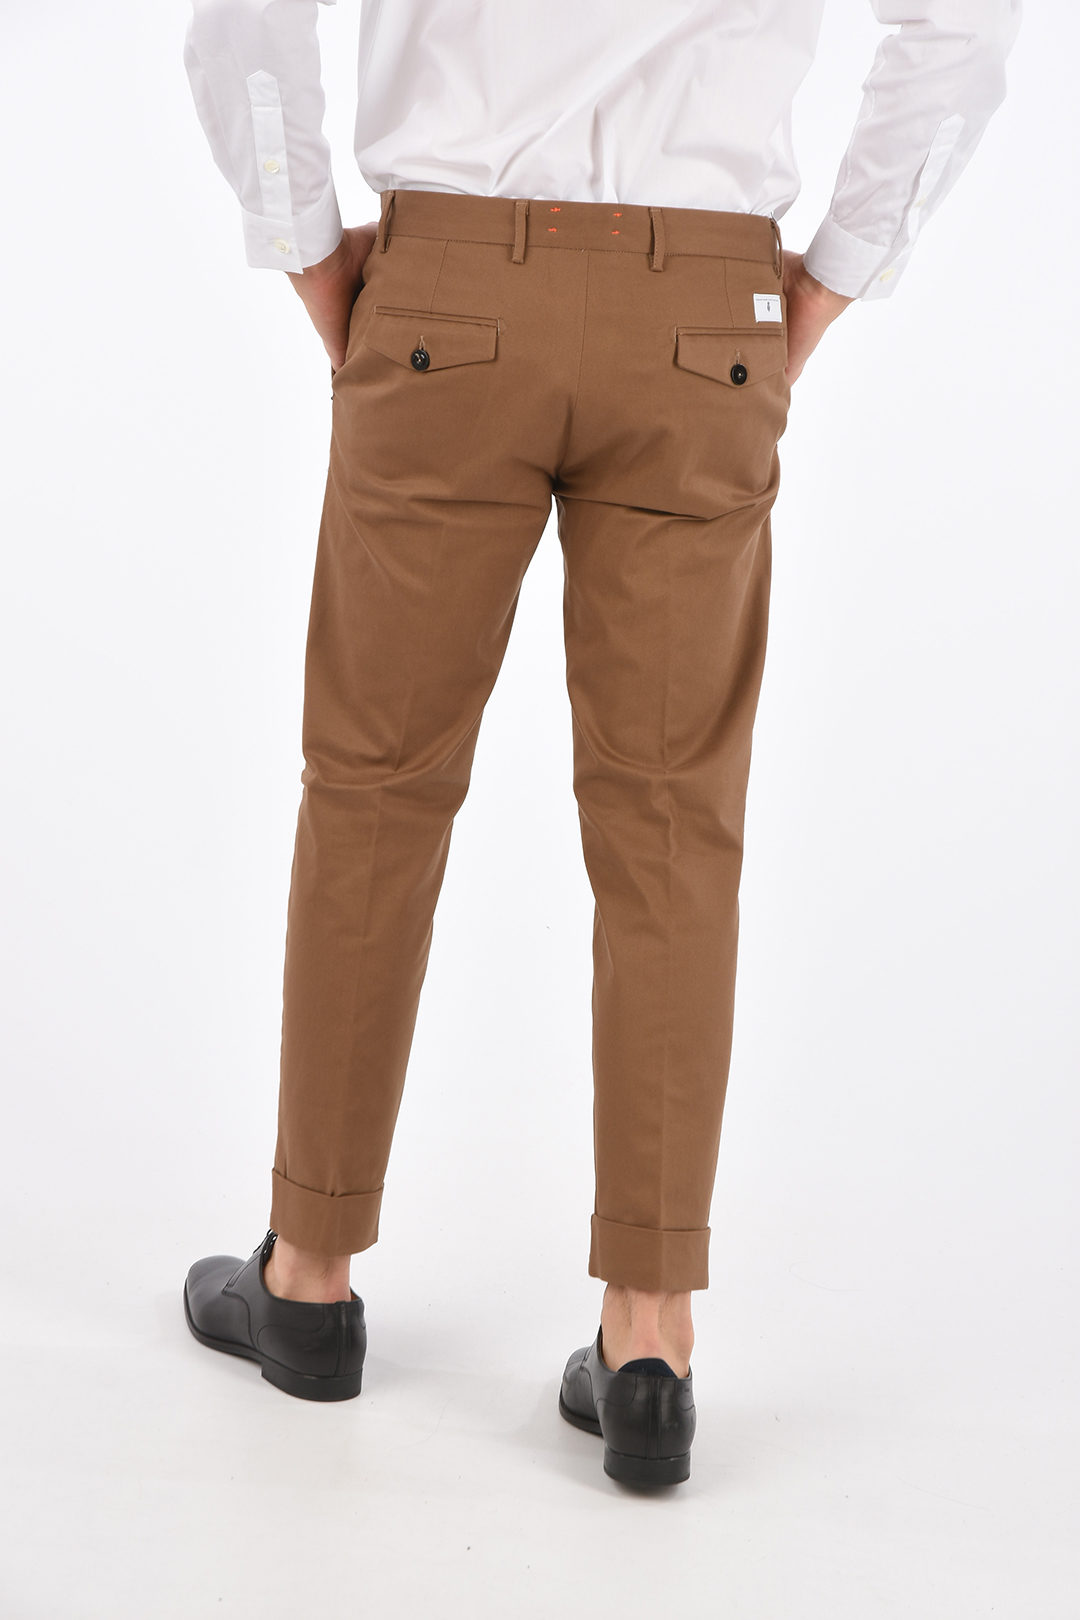 Cuffed Chinos Trousers  Buy Cuffed Chinos Trousers online in India